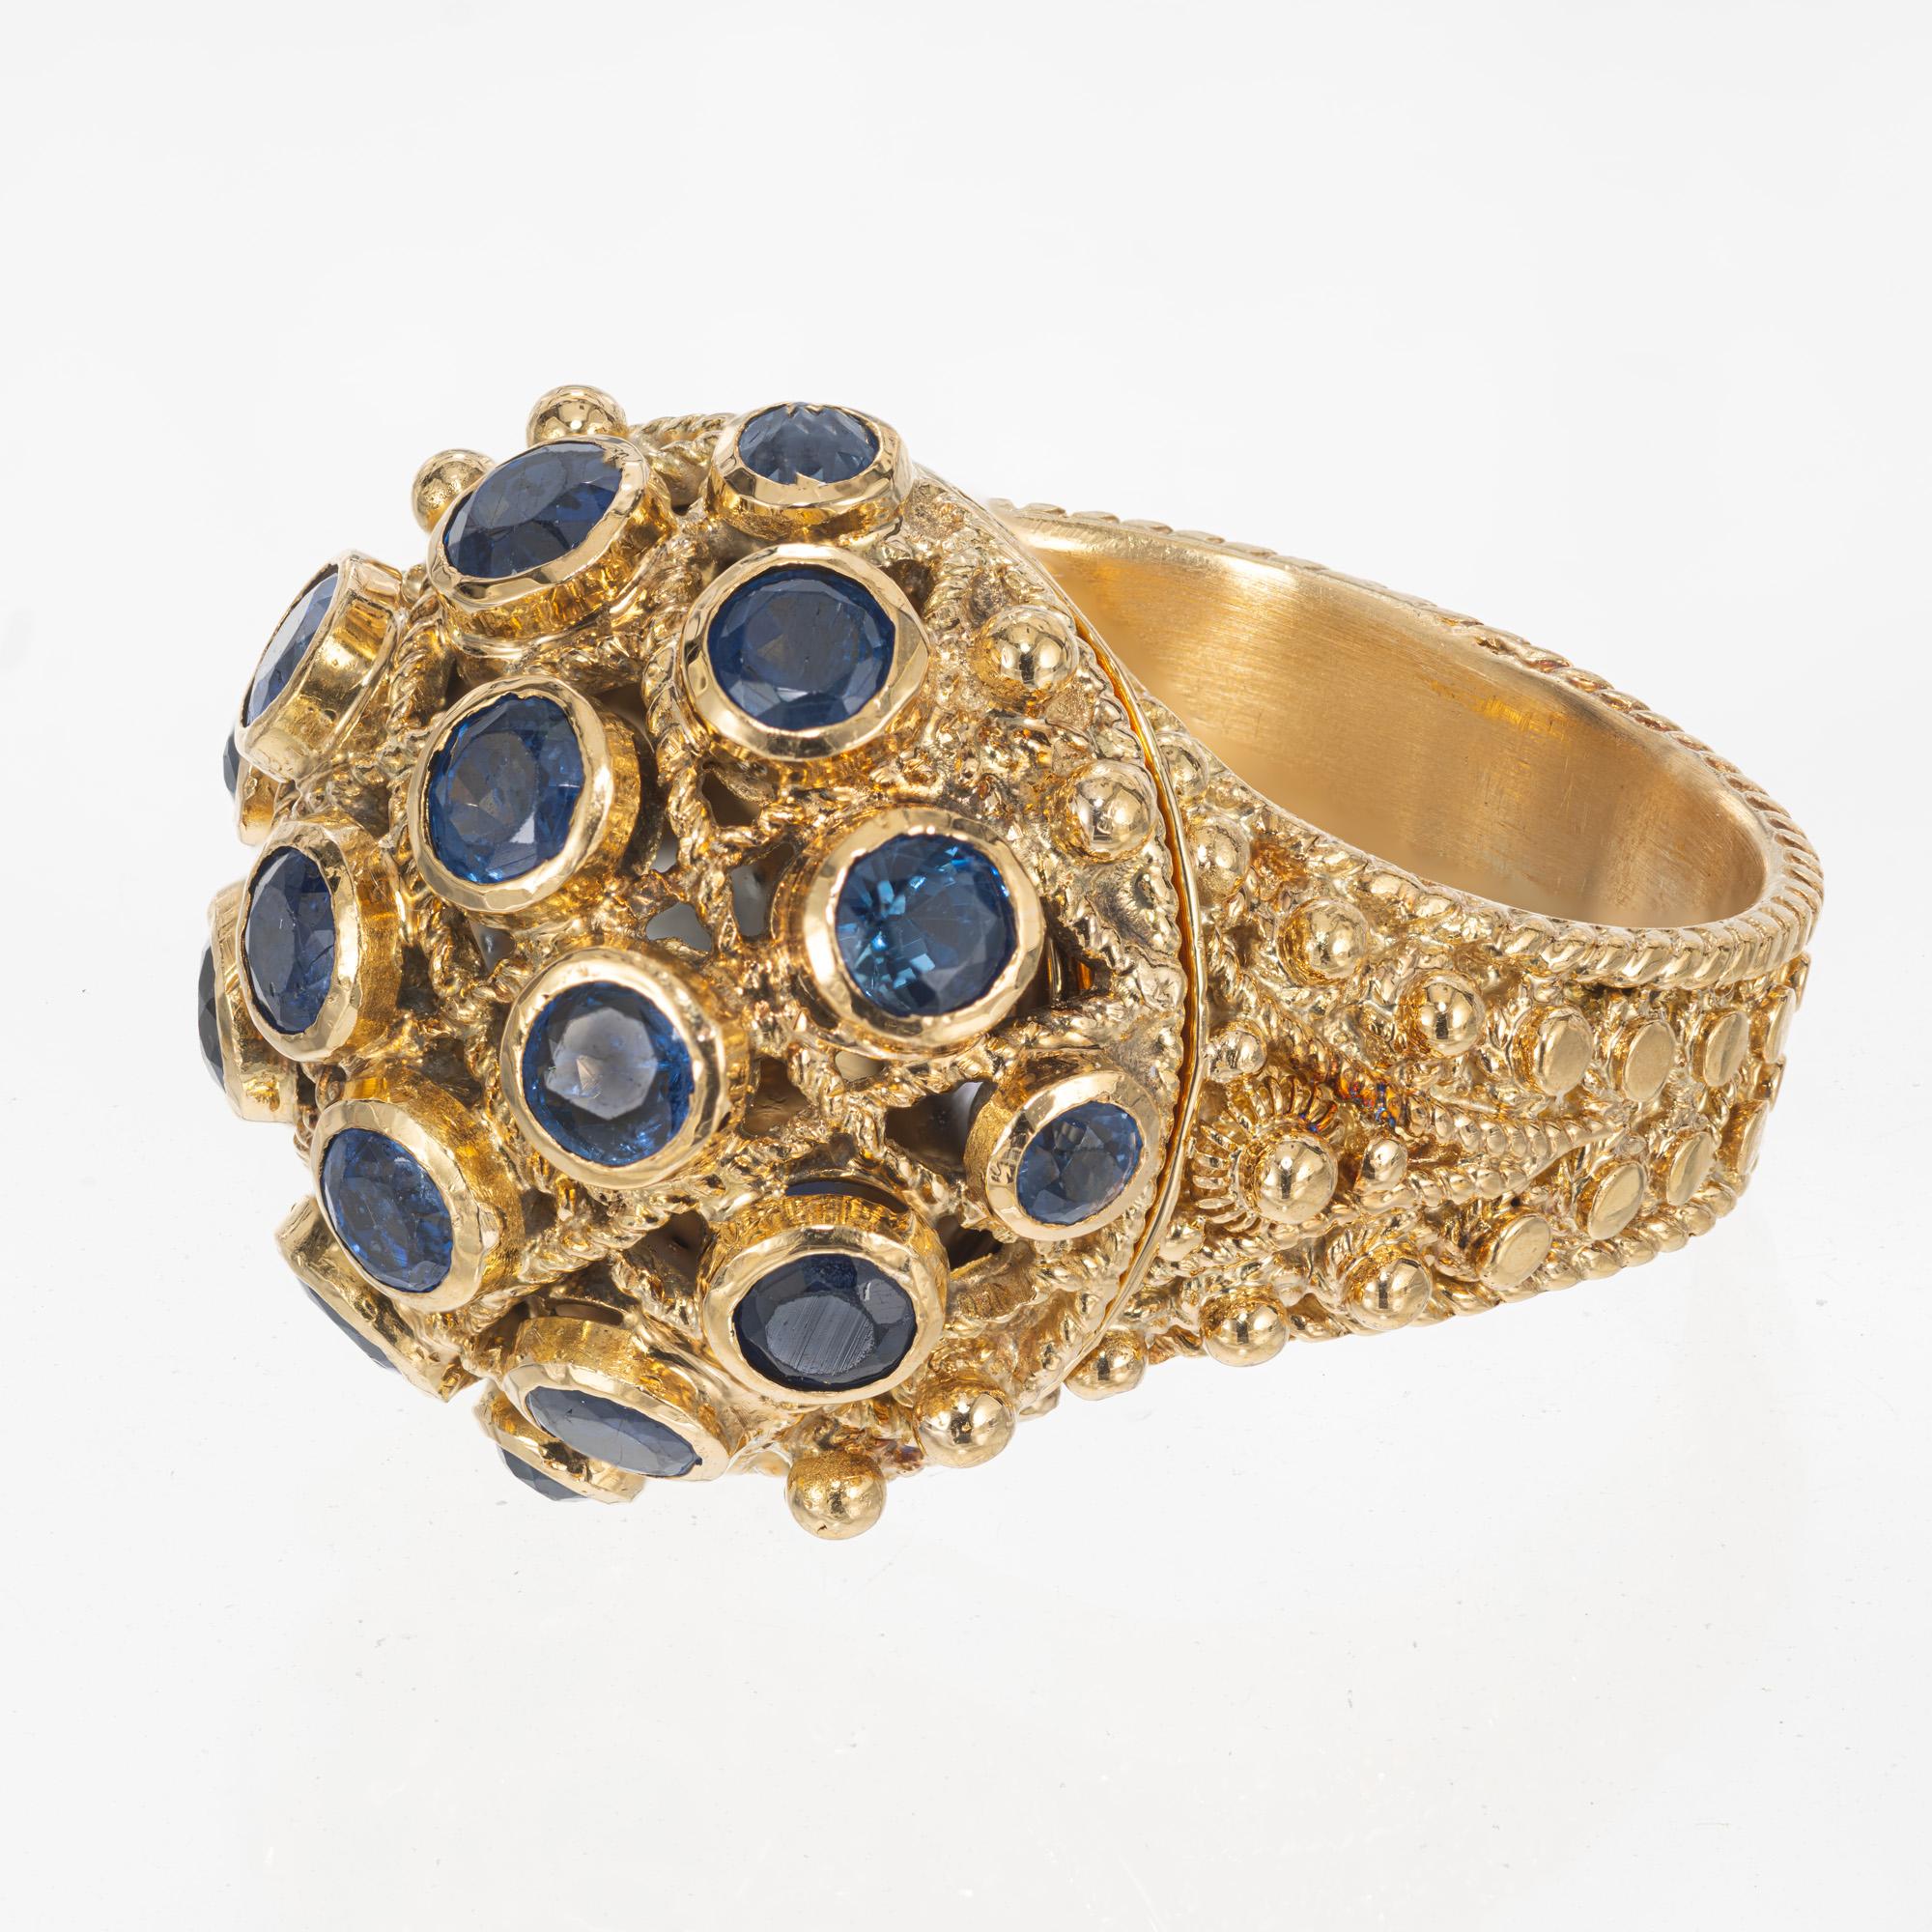 Sapphire Poison handmade cocktail ring. These unique ring is adorned with 16 round bezel set sapphires, mounted on a dome style top. Twisted 19k yellow gold wire sperate each stone. The hinged dome top lifts up. Granulation work is detailed